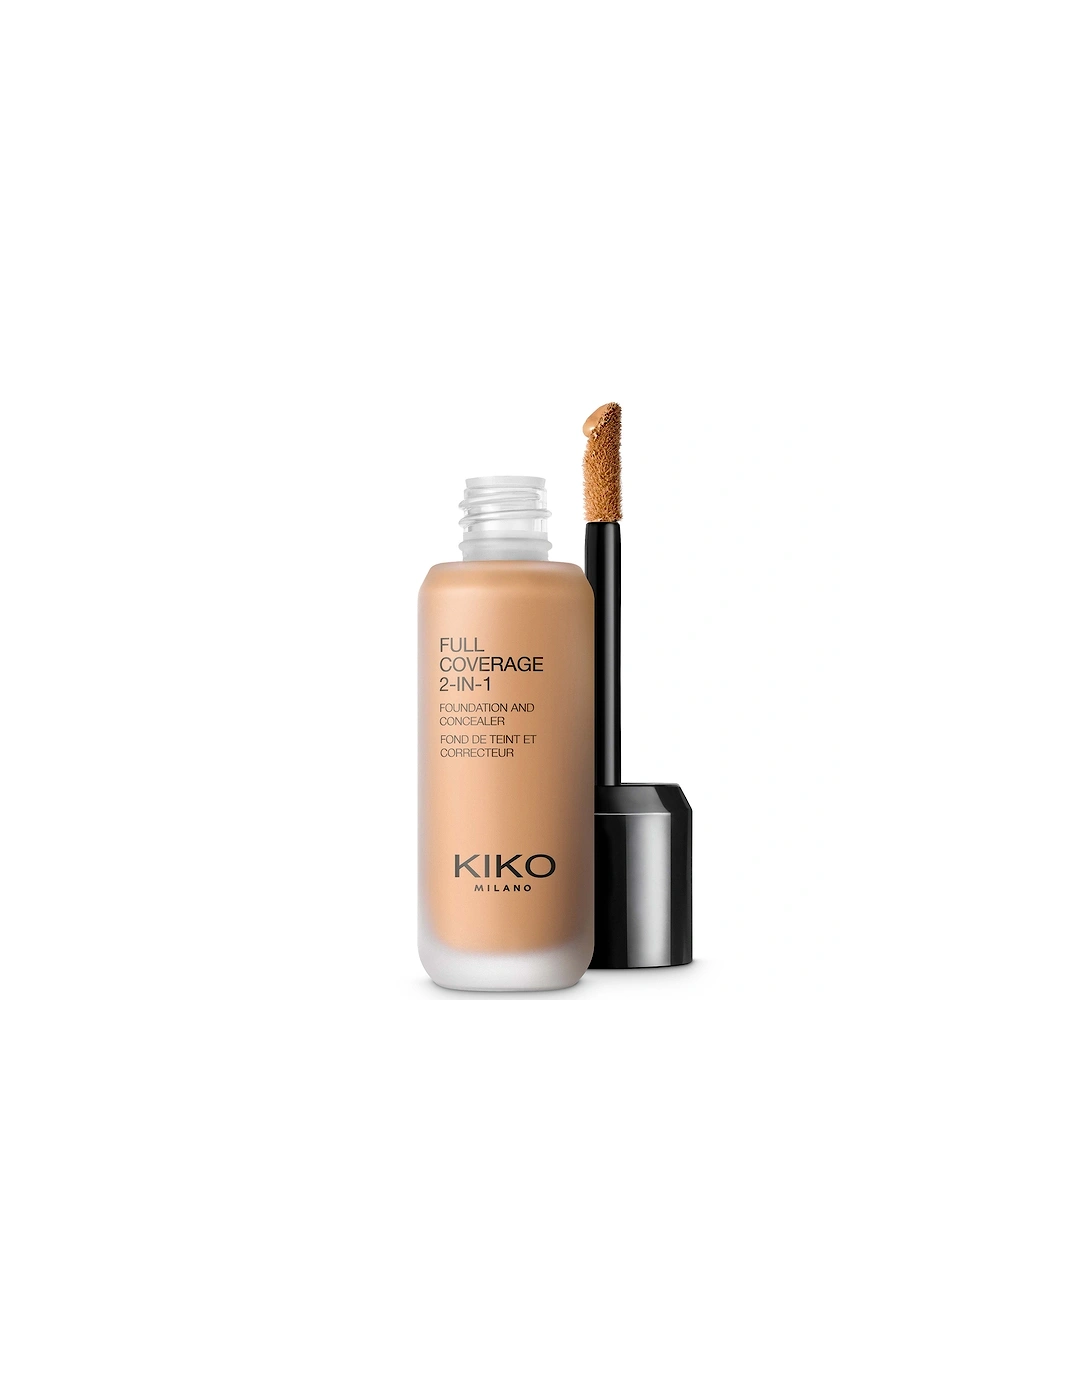 Full Coverage 2-in-1 Foundation and Concealer 25ml - 80 Warm Beige, 2 of 1